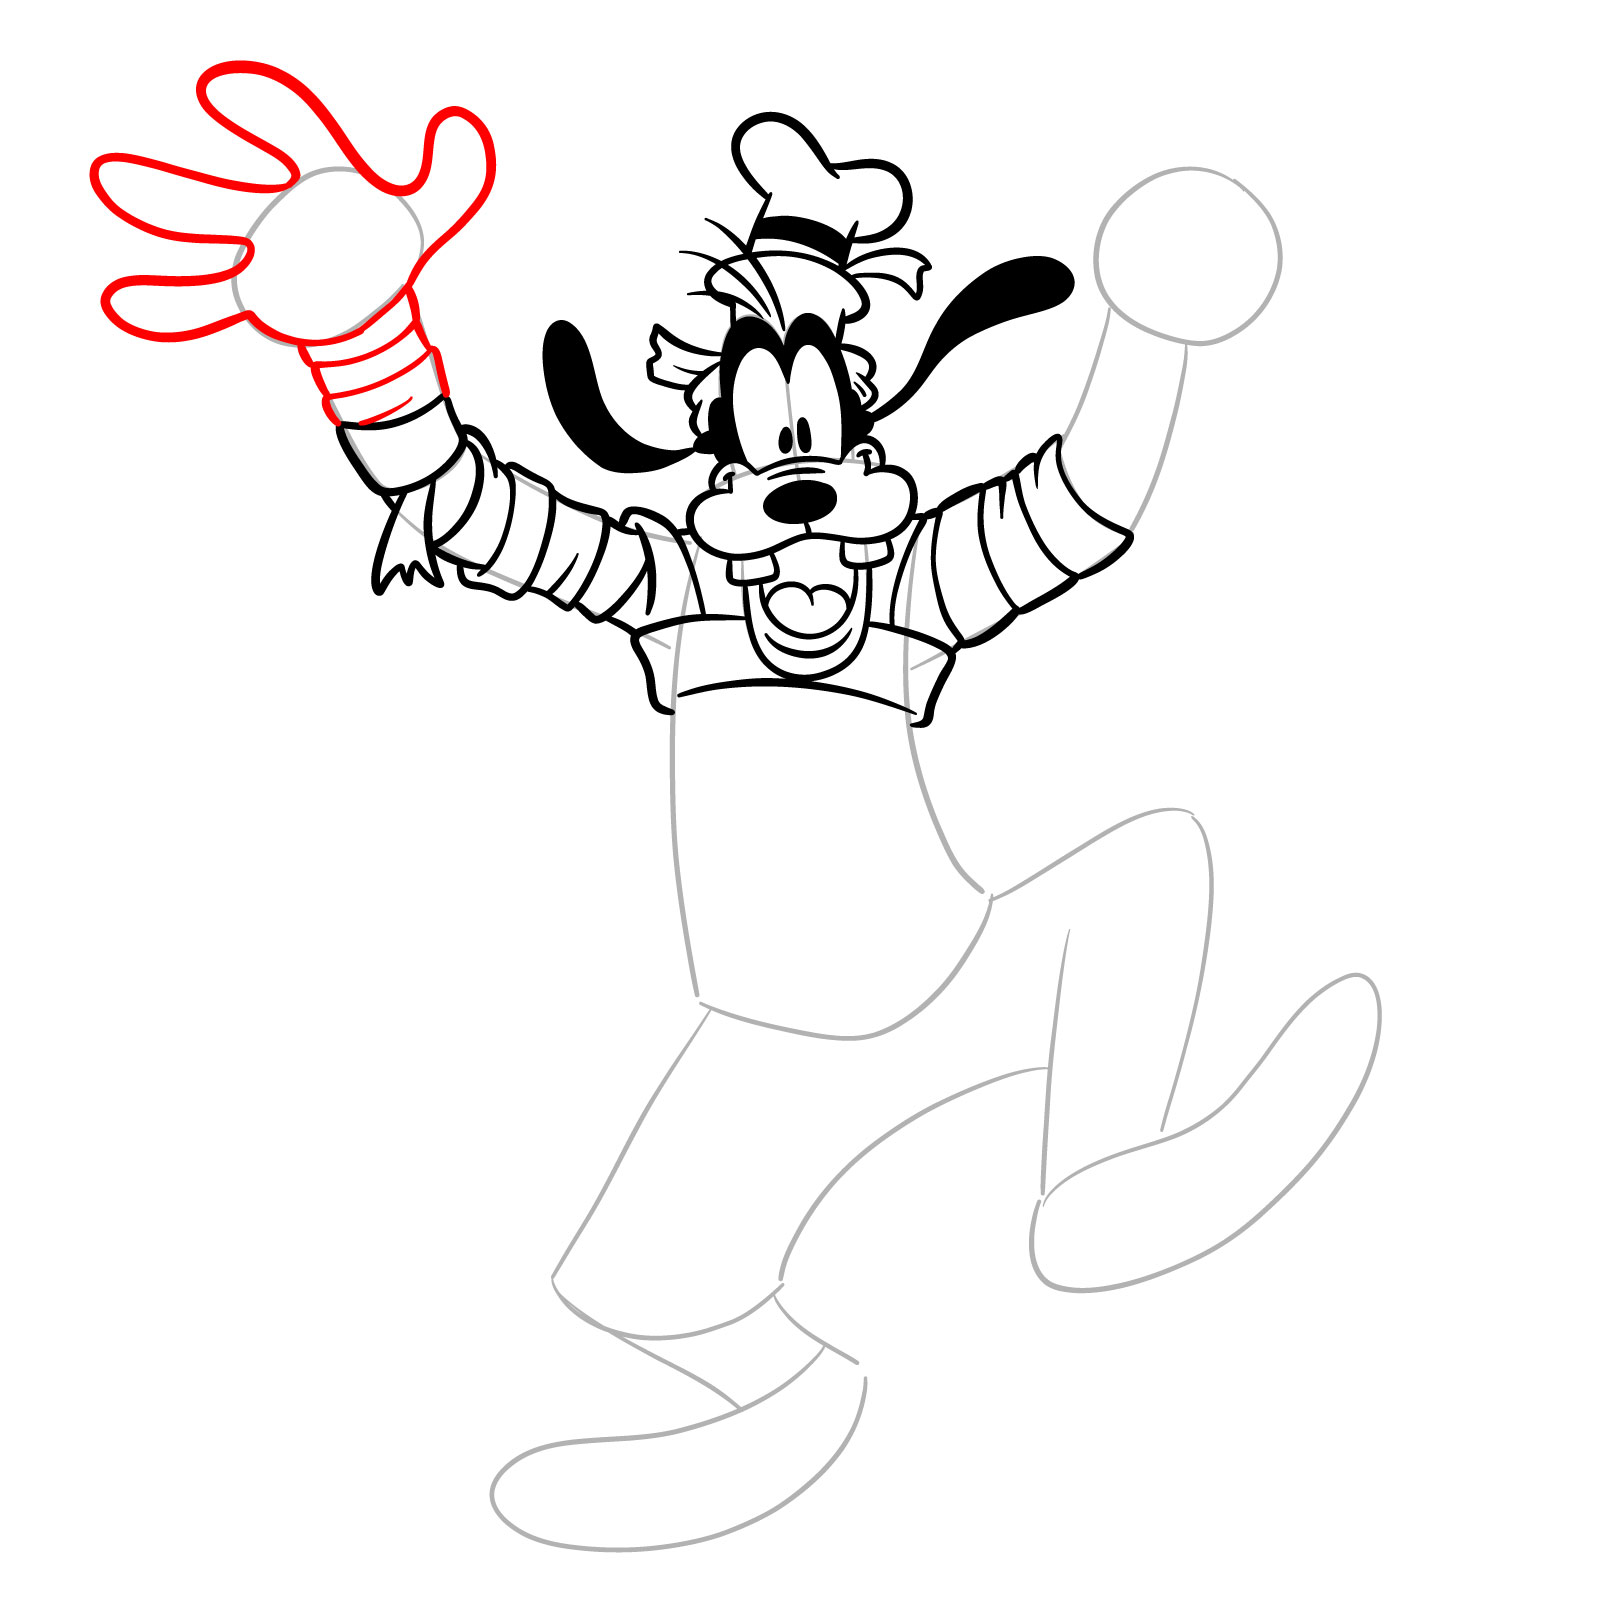 How to draw Halloween Goofy as a mummy - step 17